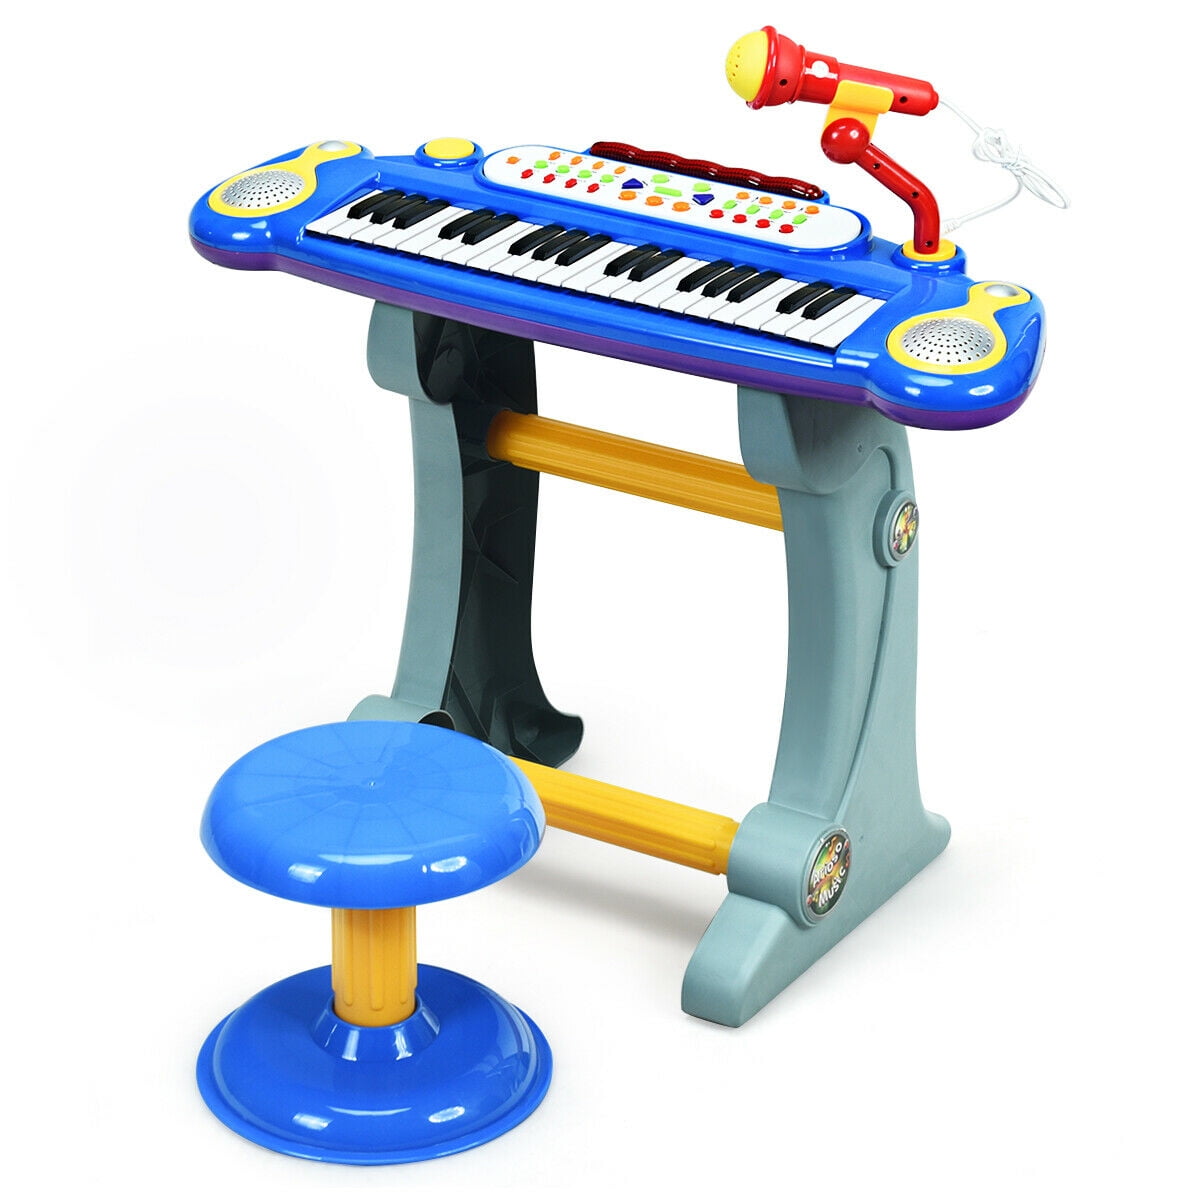 Hering Piano Country toy piano